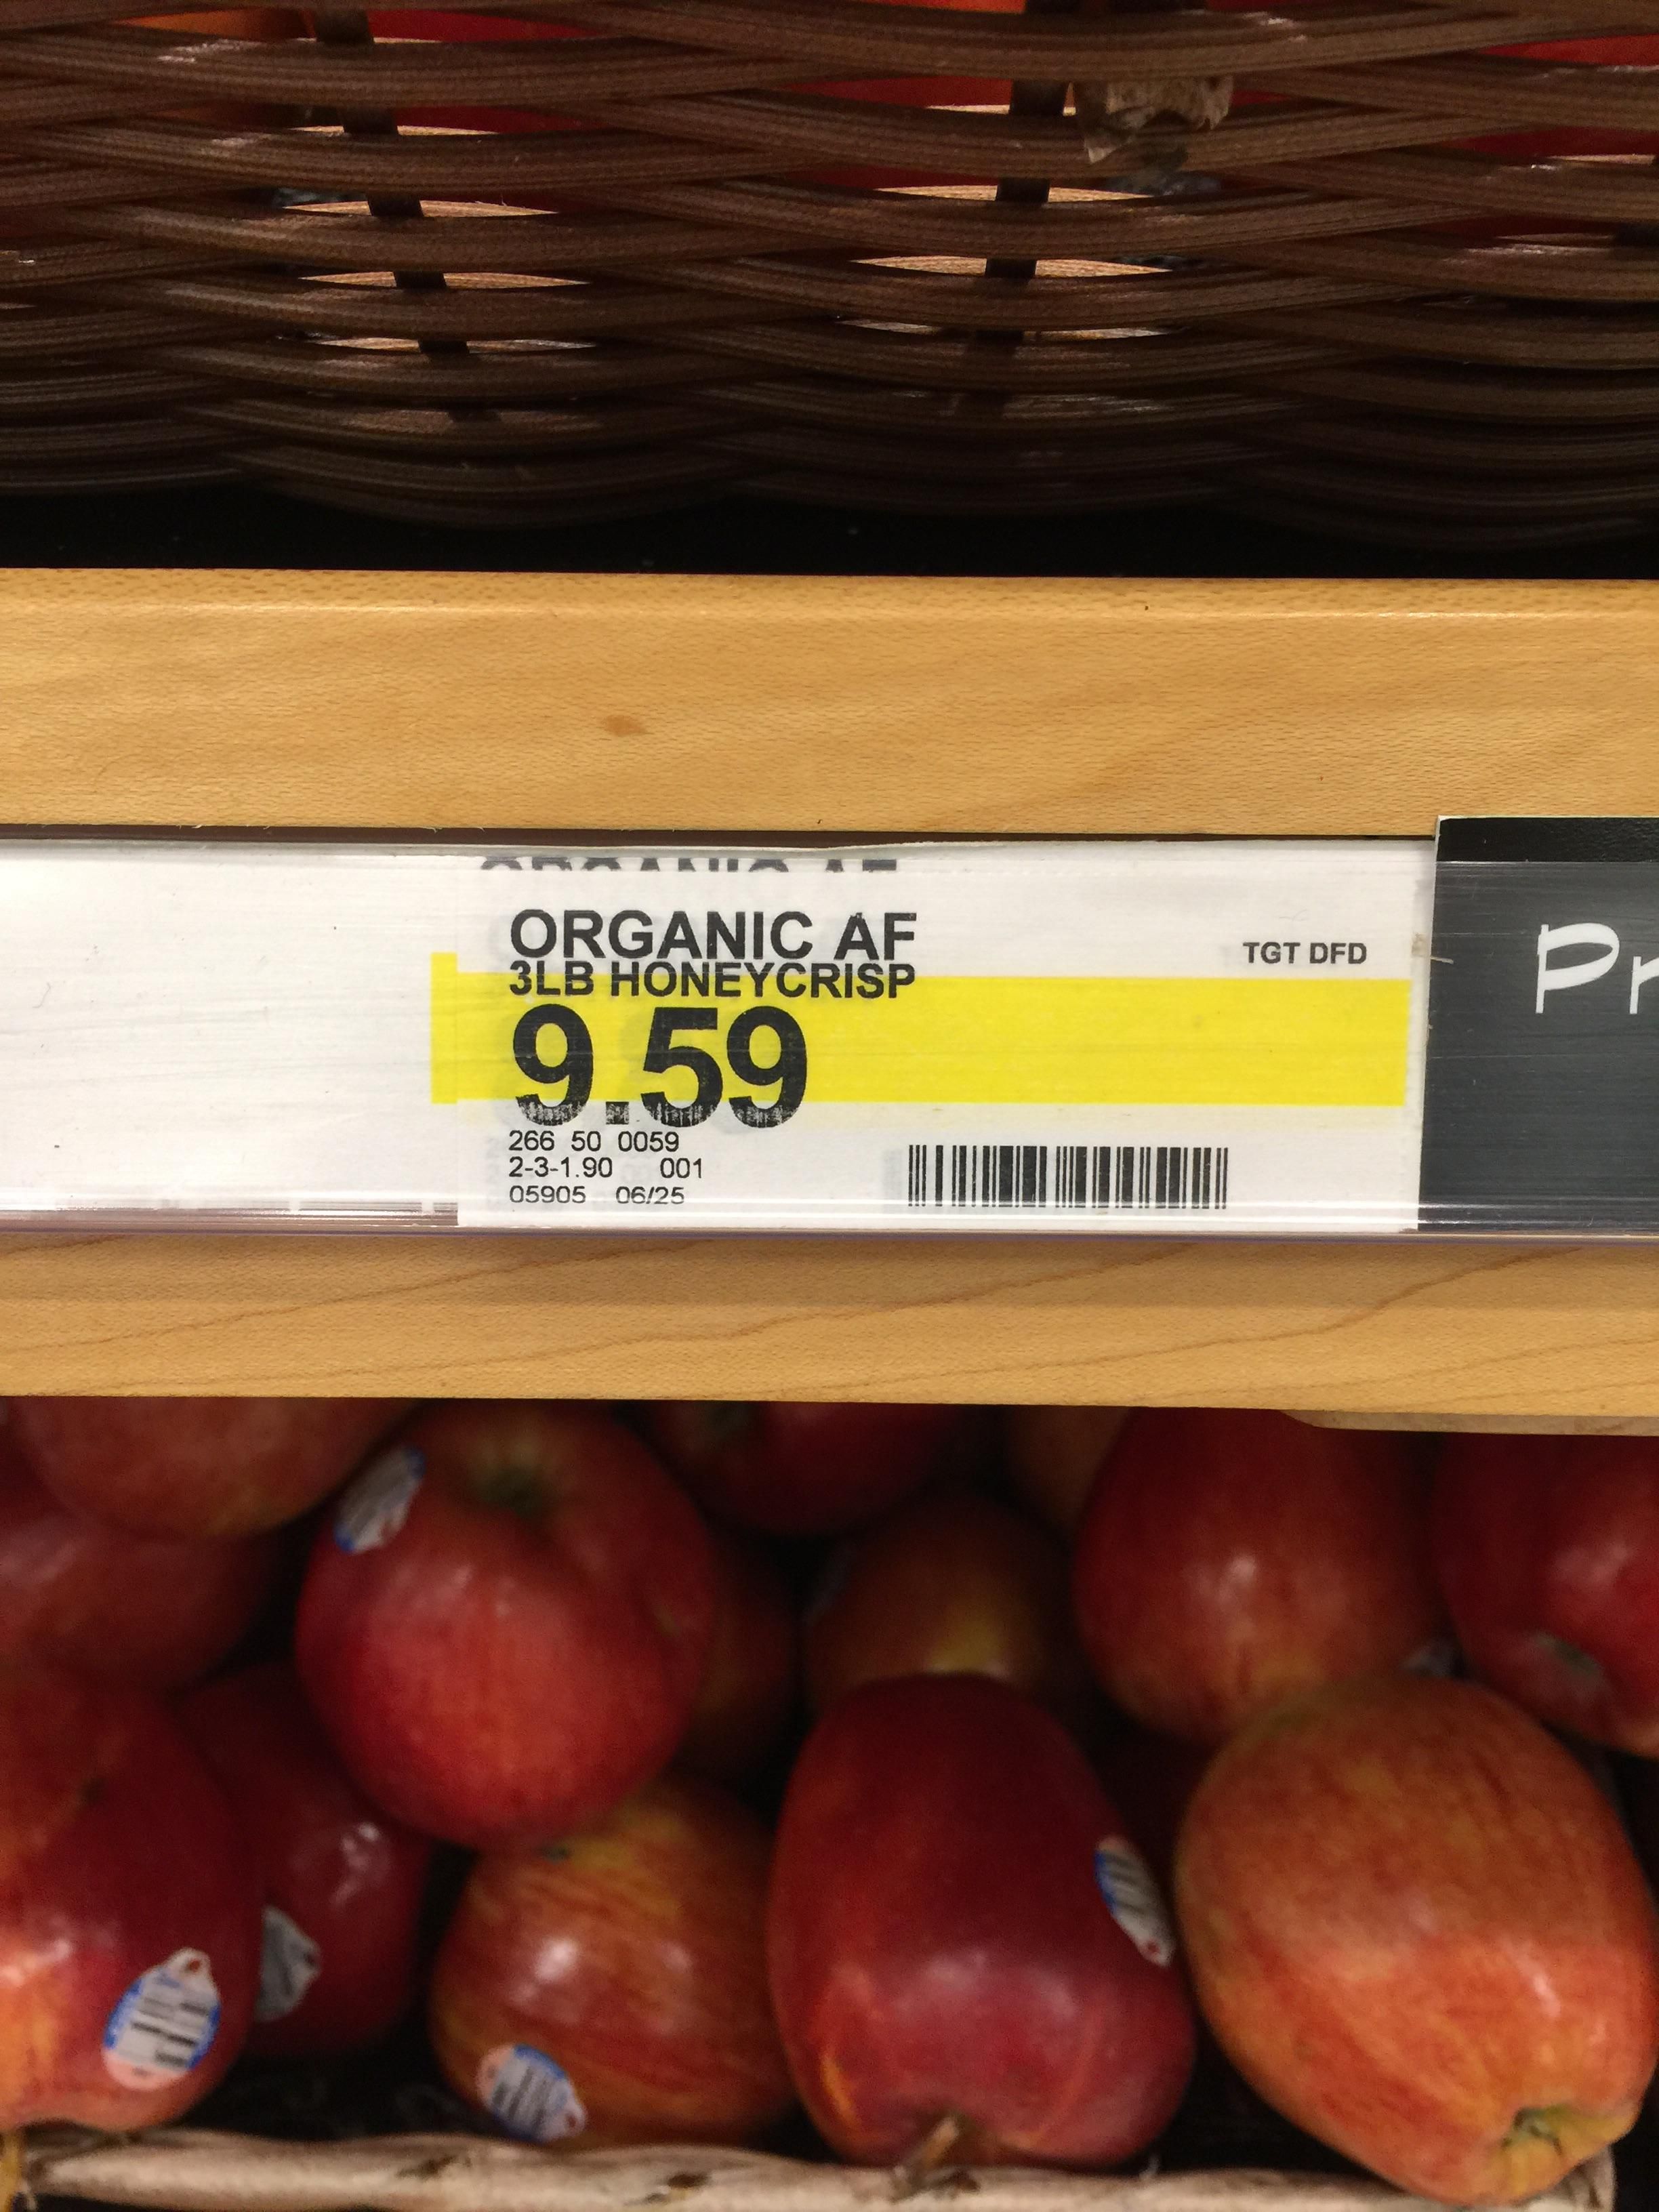 So this is as organic as it gets?